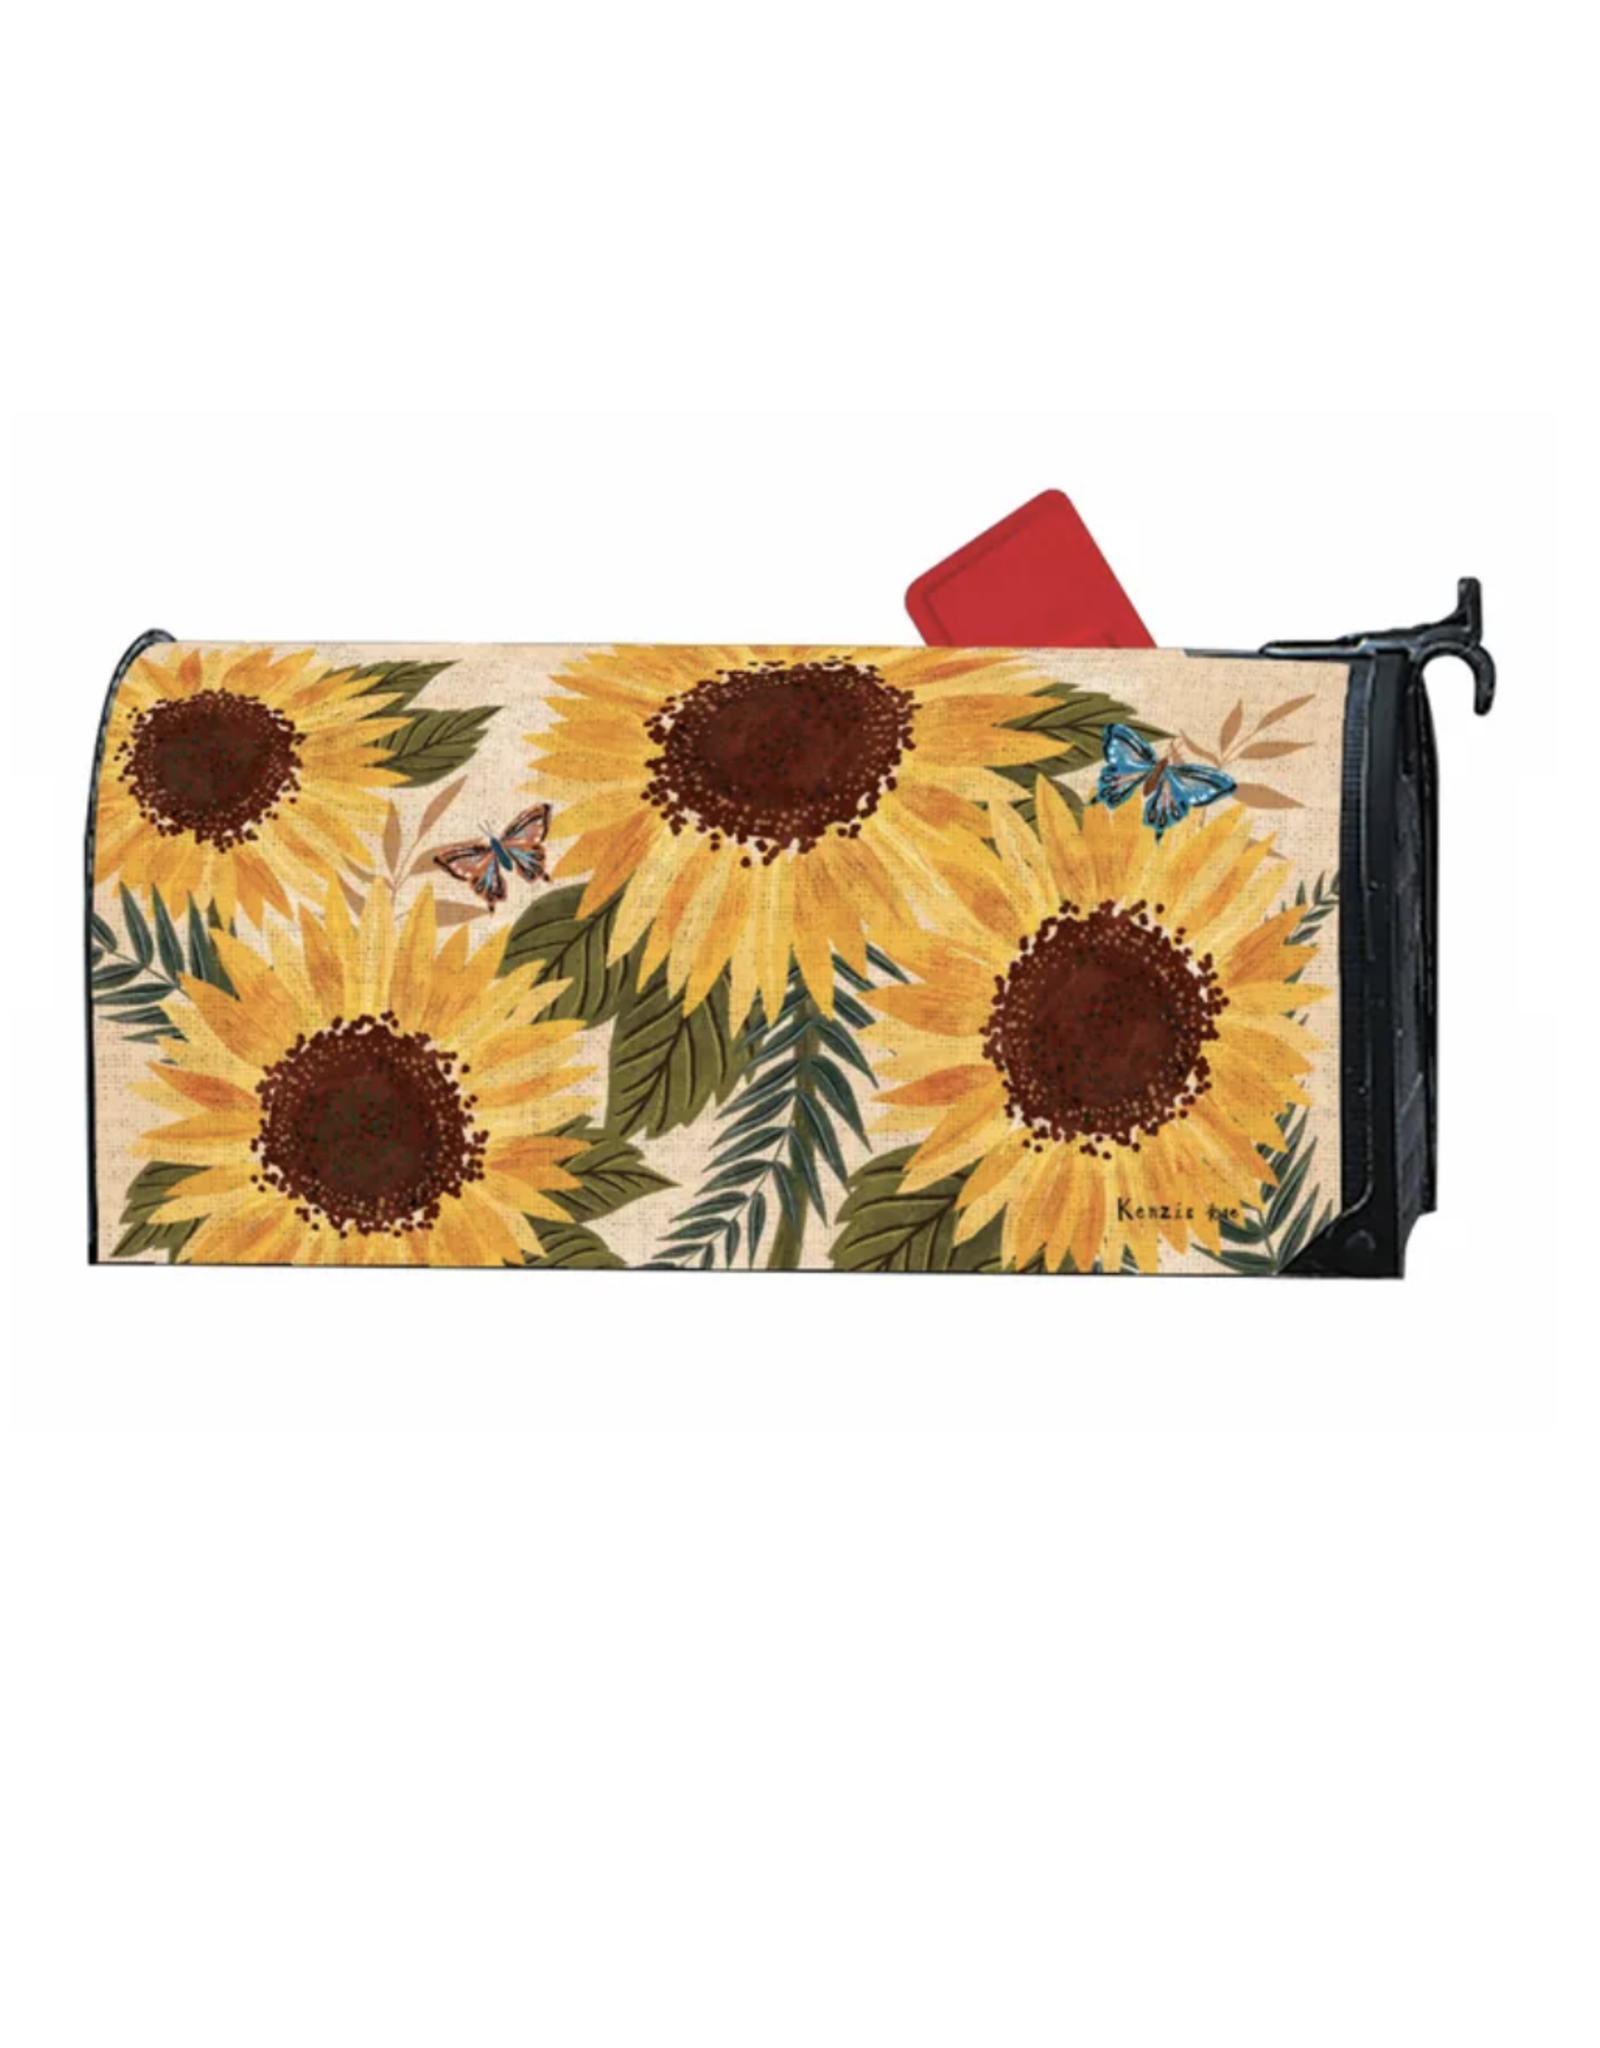 Studio M Sunflowers & Butterfly Large Mailbox Cover